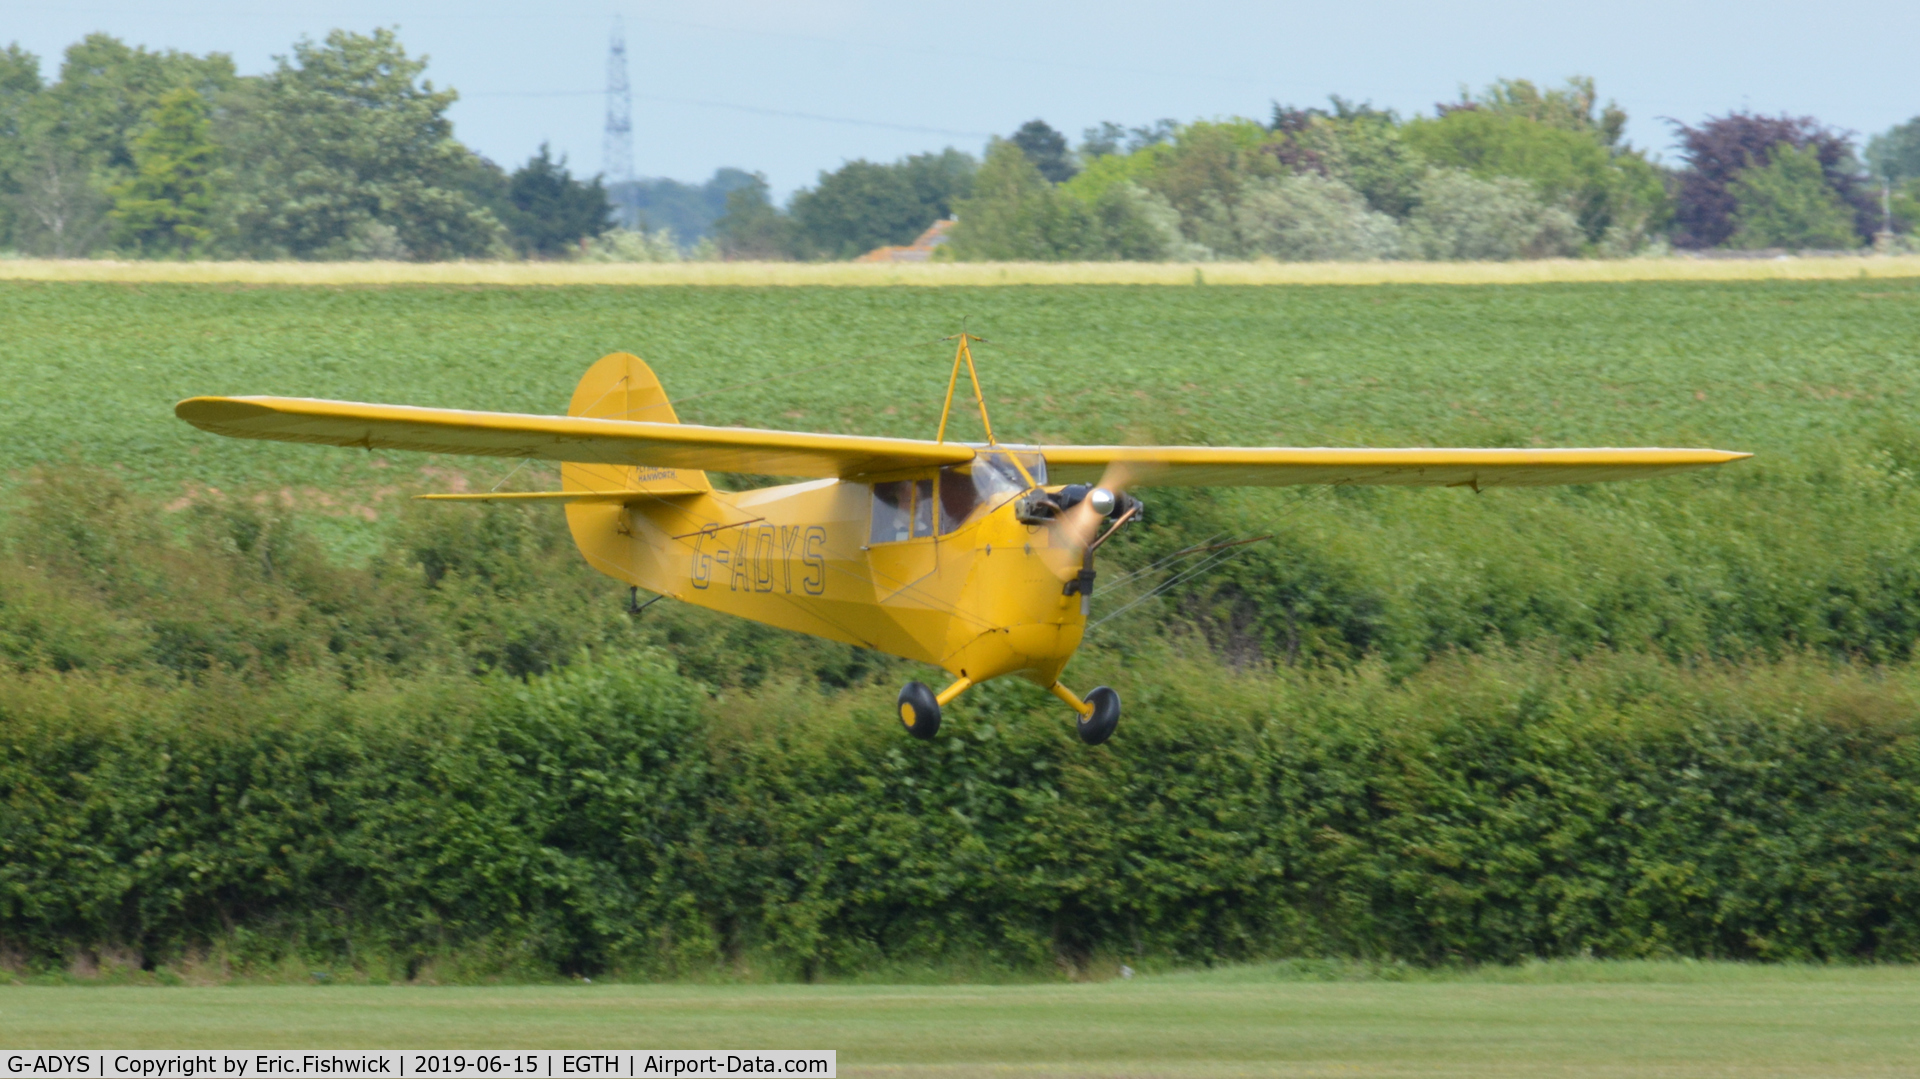 G-ADYS, 1935 Aeronca C-3 C/N A-600, 43. G-ADYS at The Evening Airshow at The Shuttleworth Collection, June, 2019.